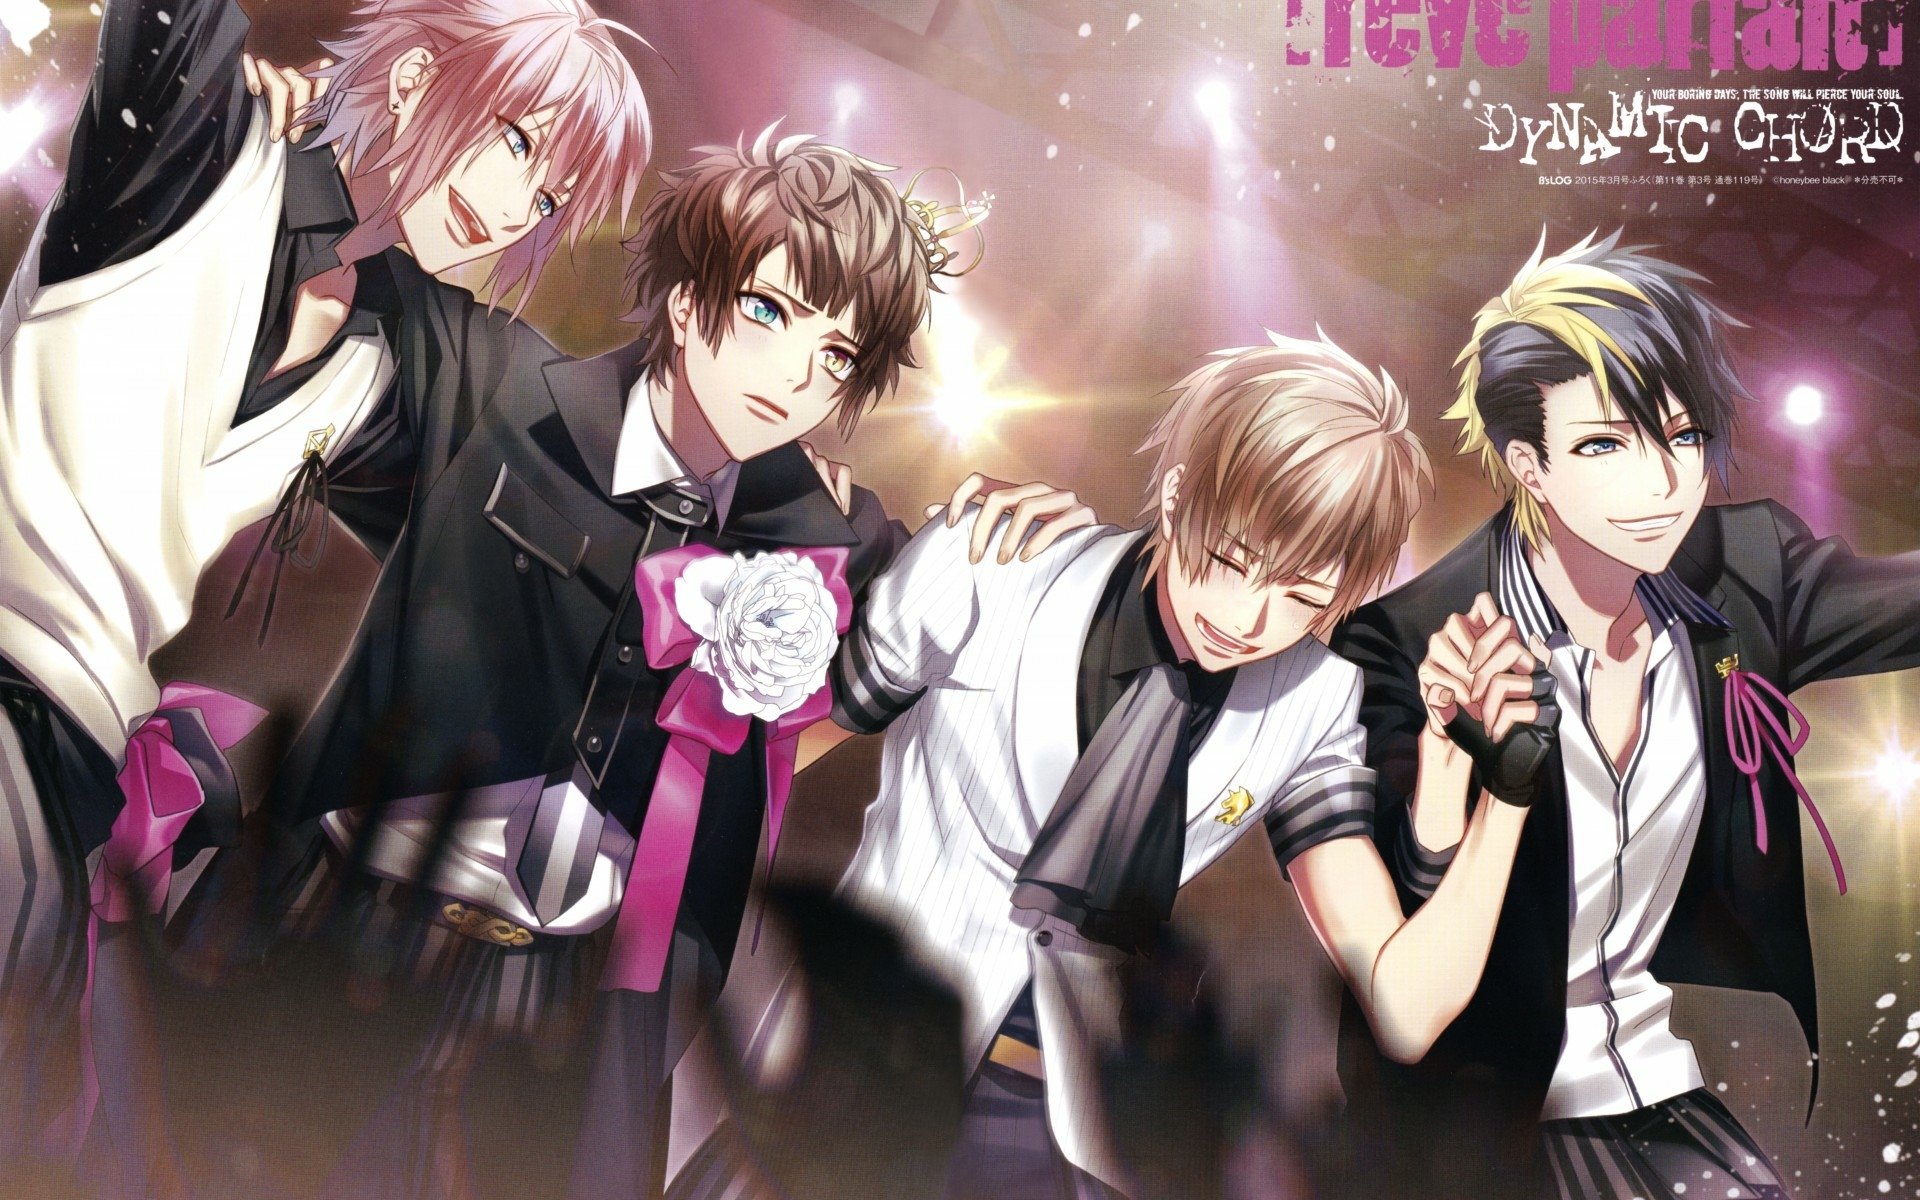 10+ Dynamic Chord HD Wallpapers and Backgrounds